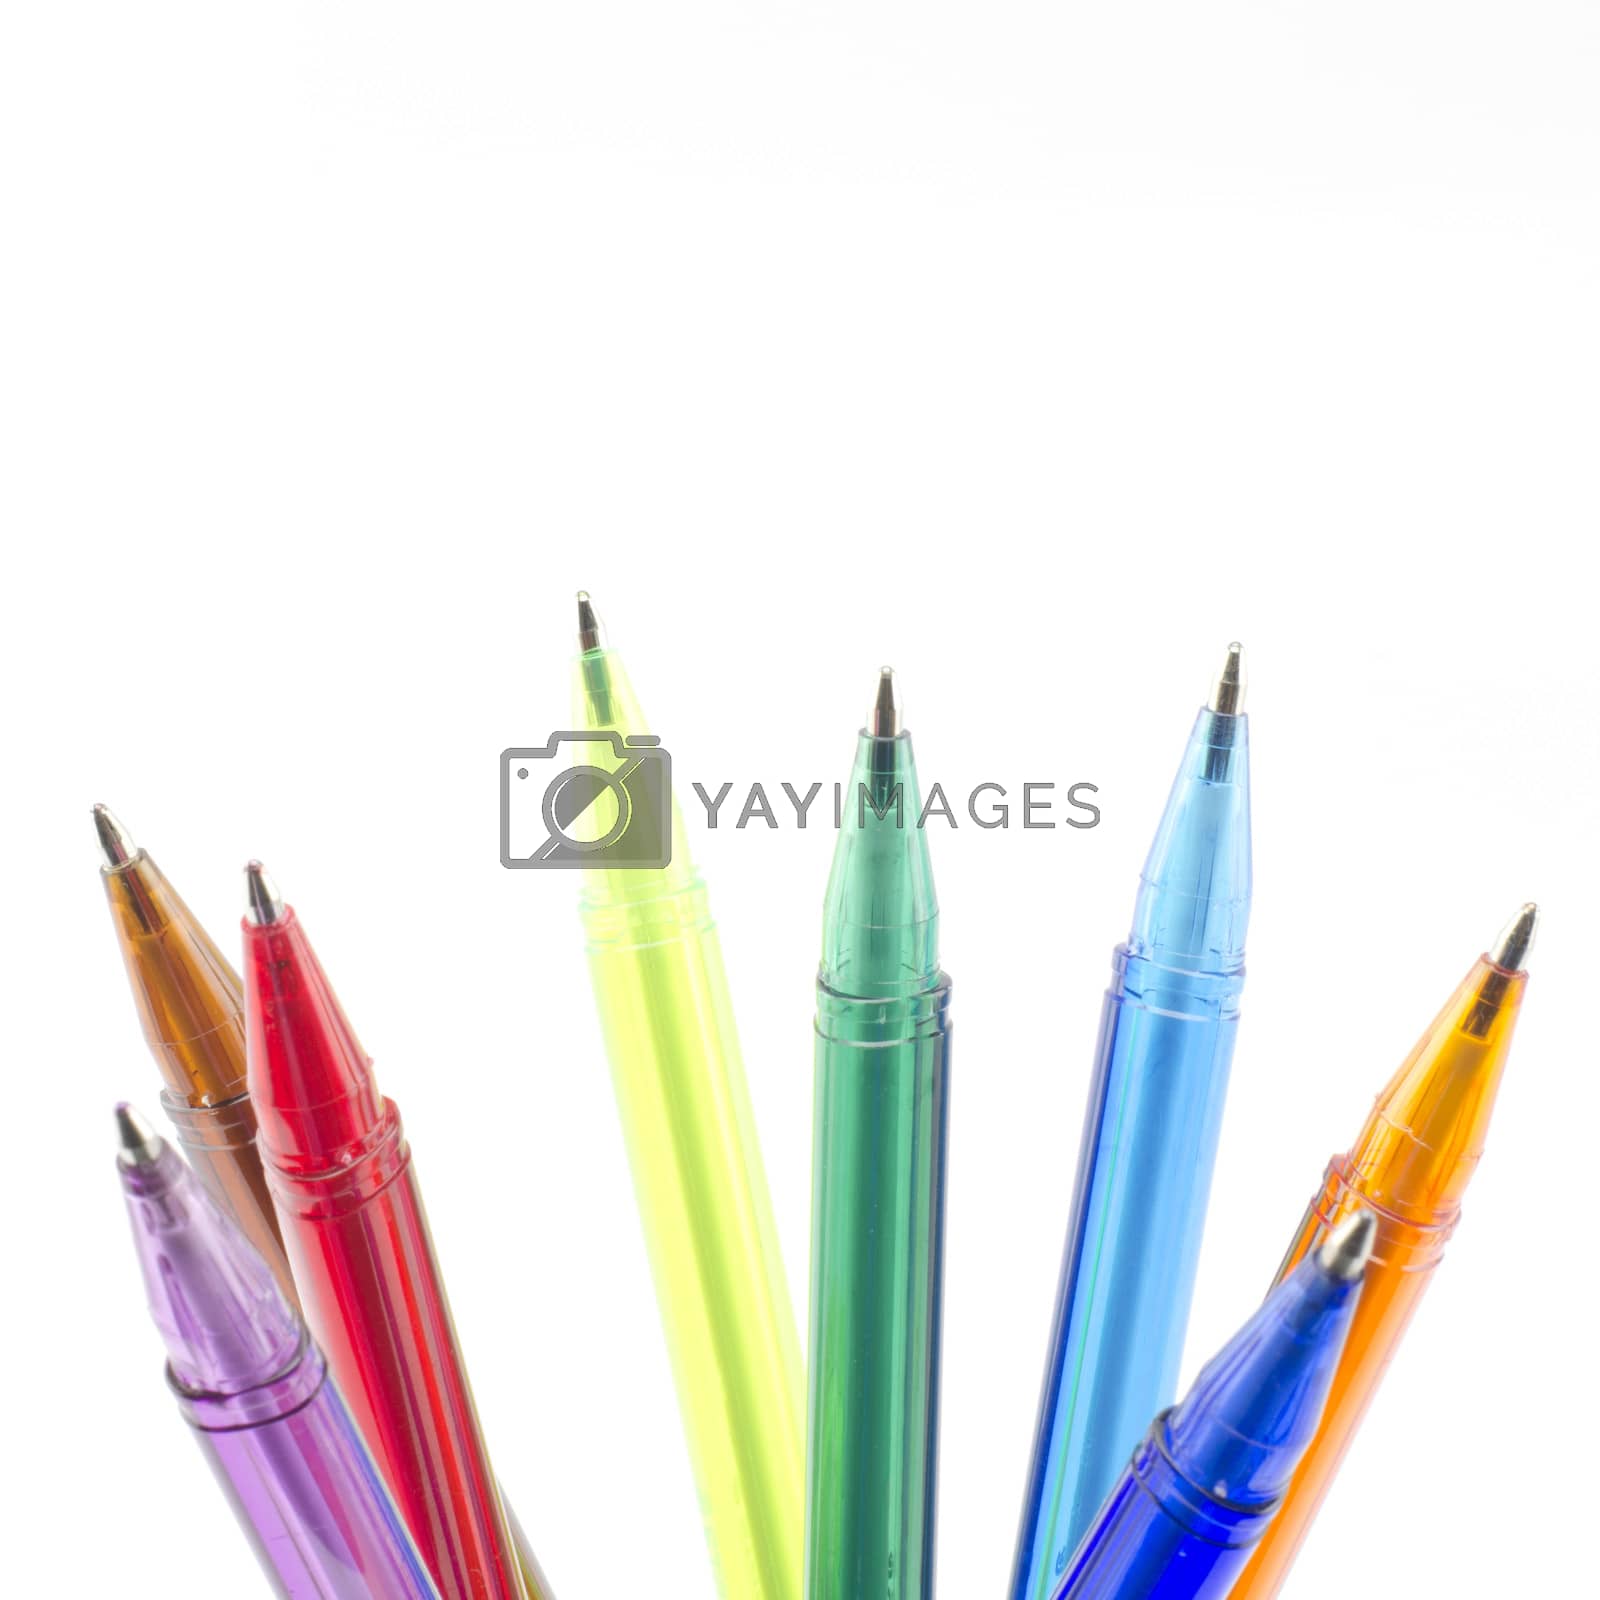 Royalty free image of colorful pens isolated on white by ammza12